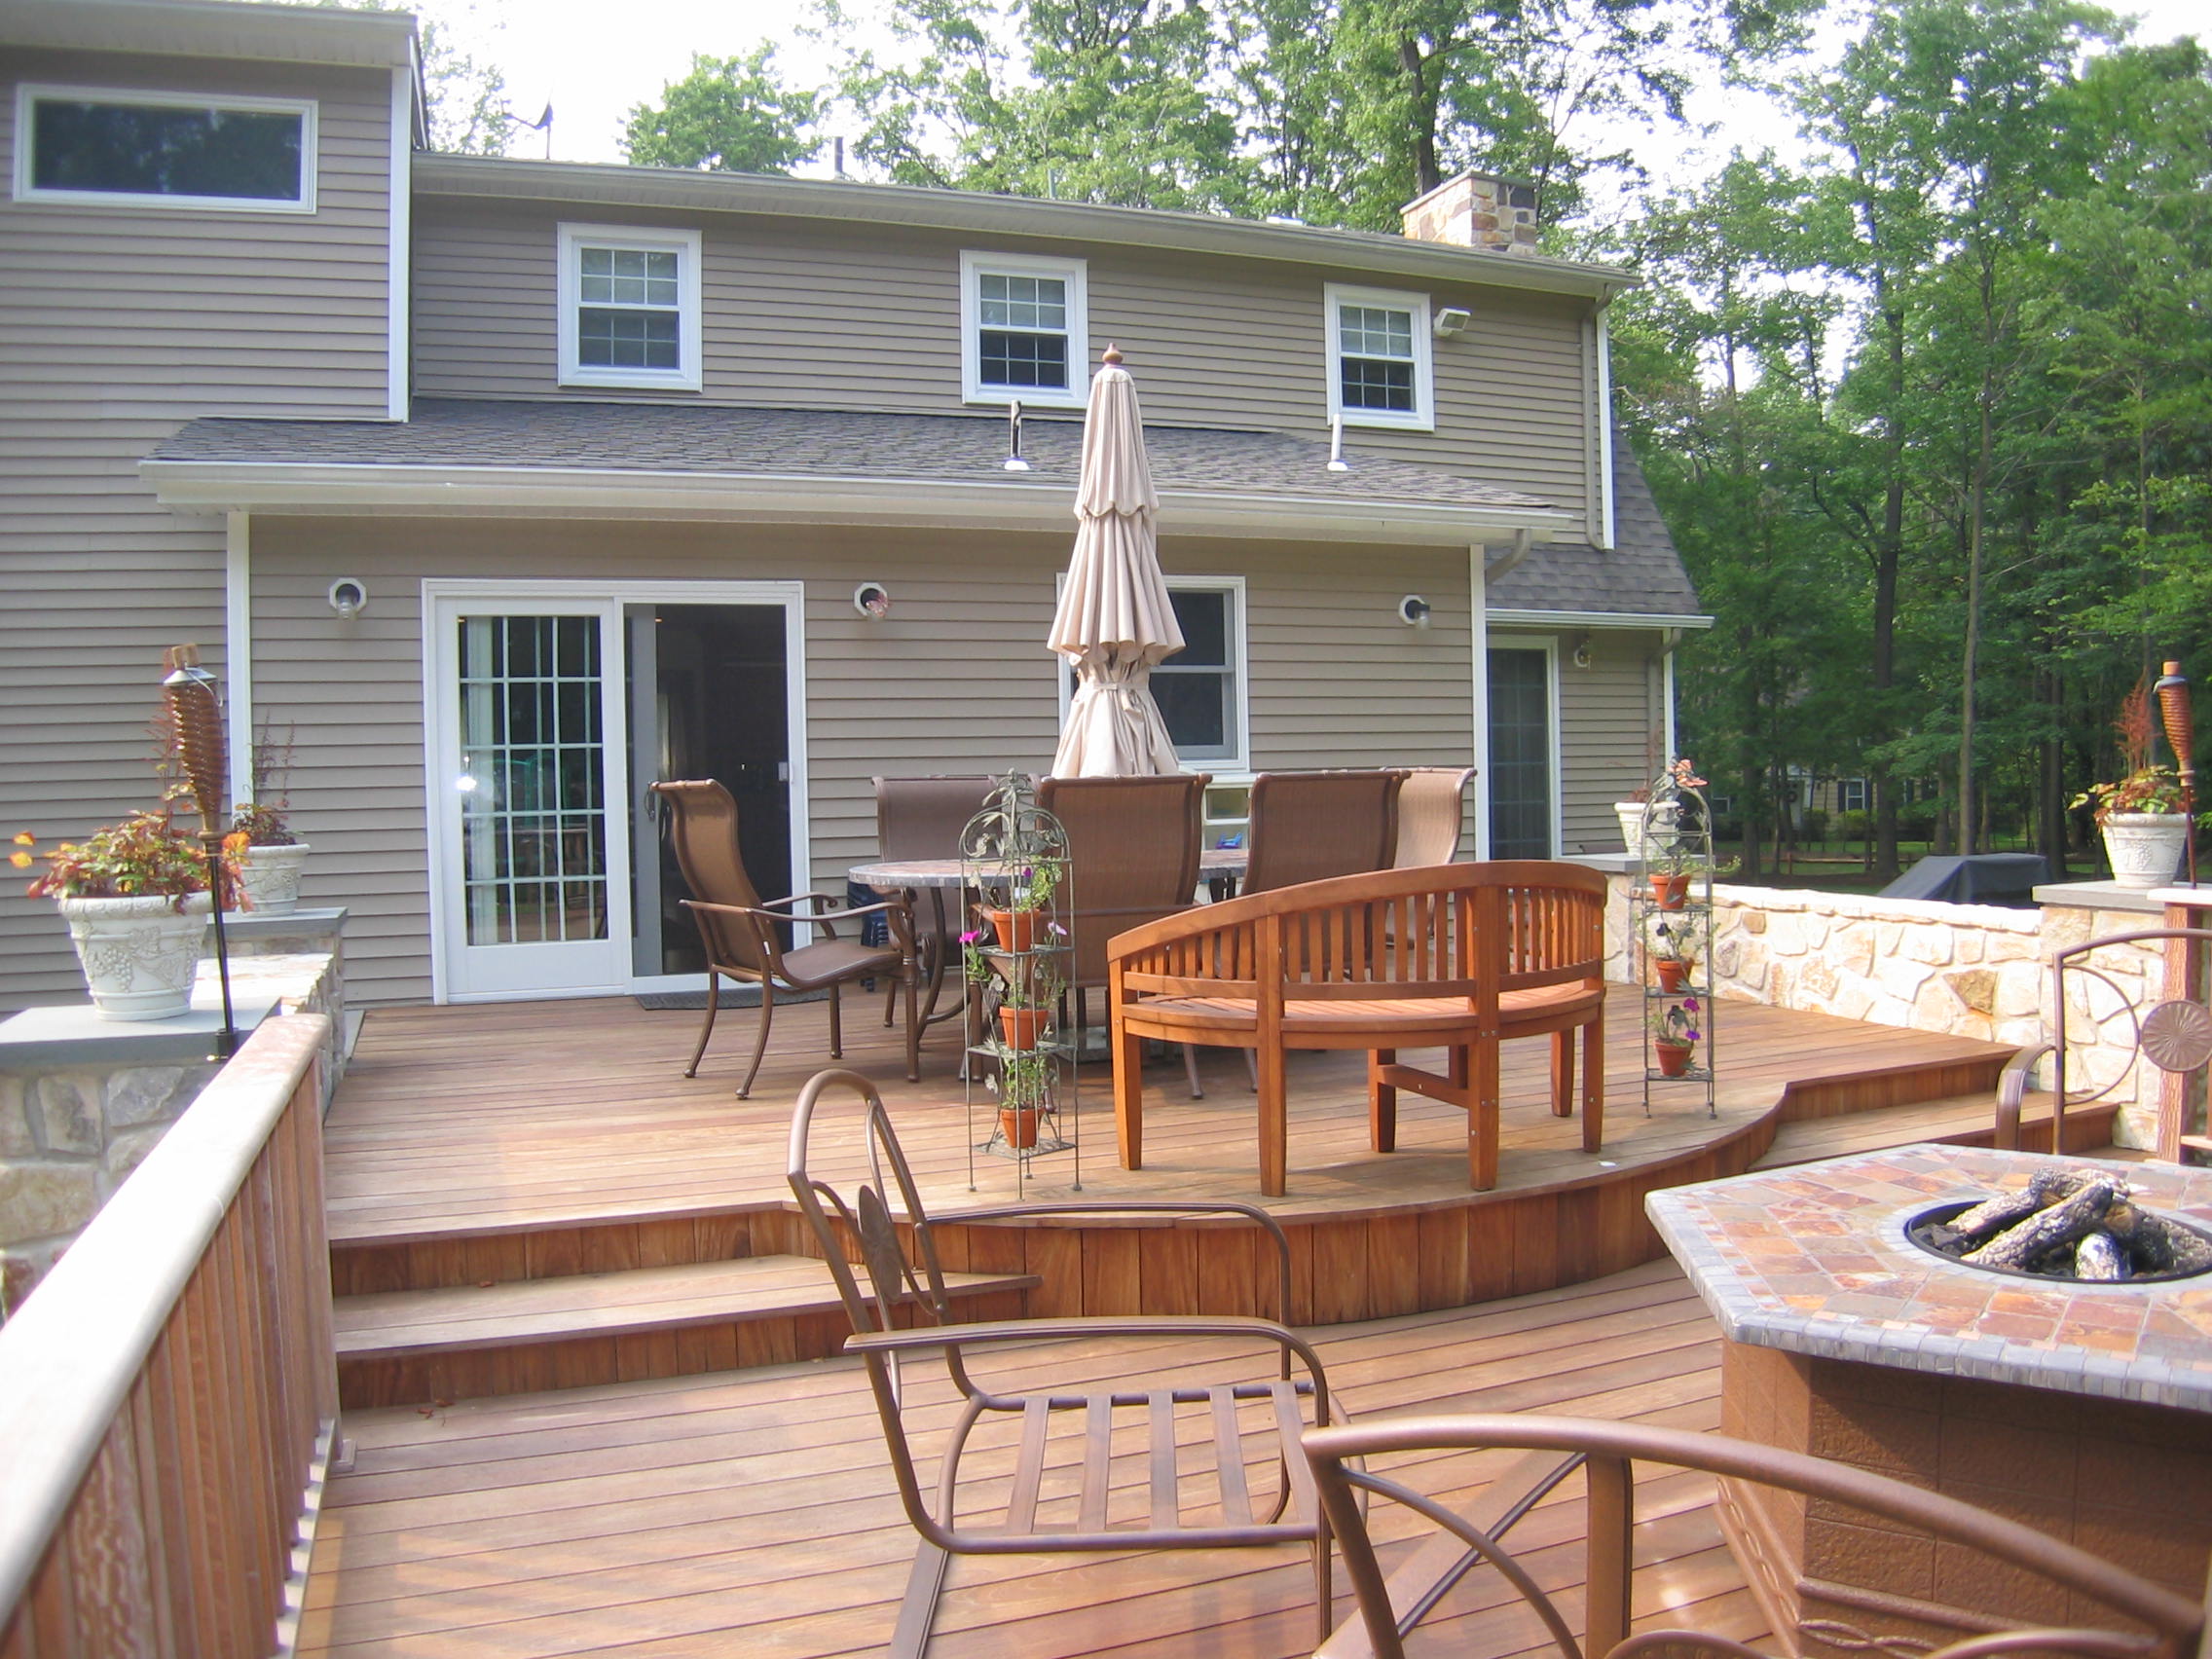  A two tiered deck with integral fire pit makes the kitchen addition beyond the true central focus of this Warren home. 